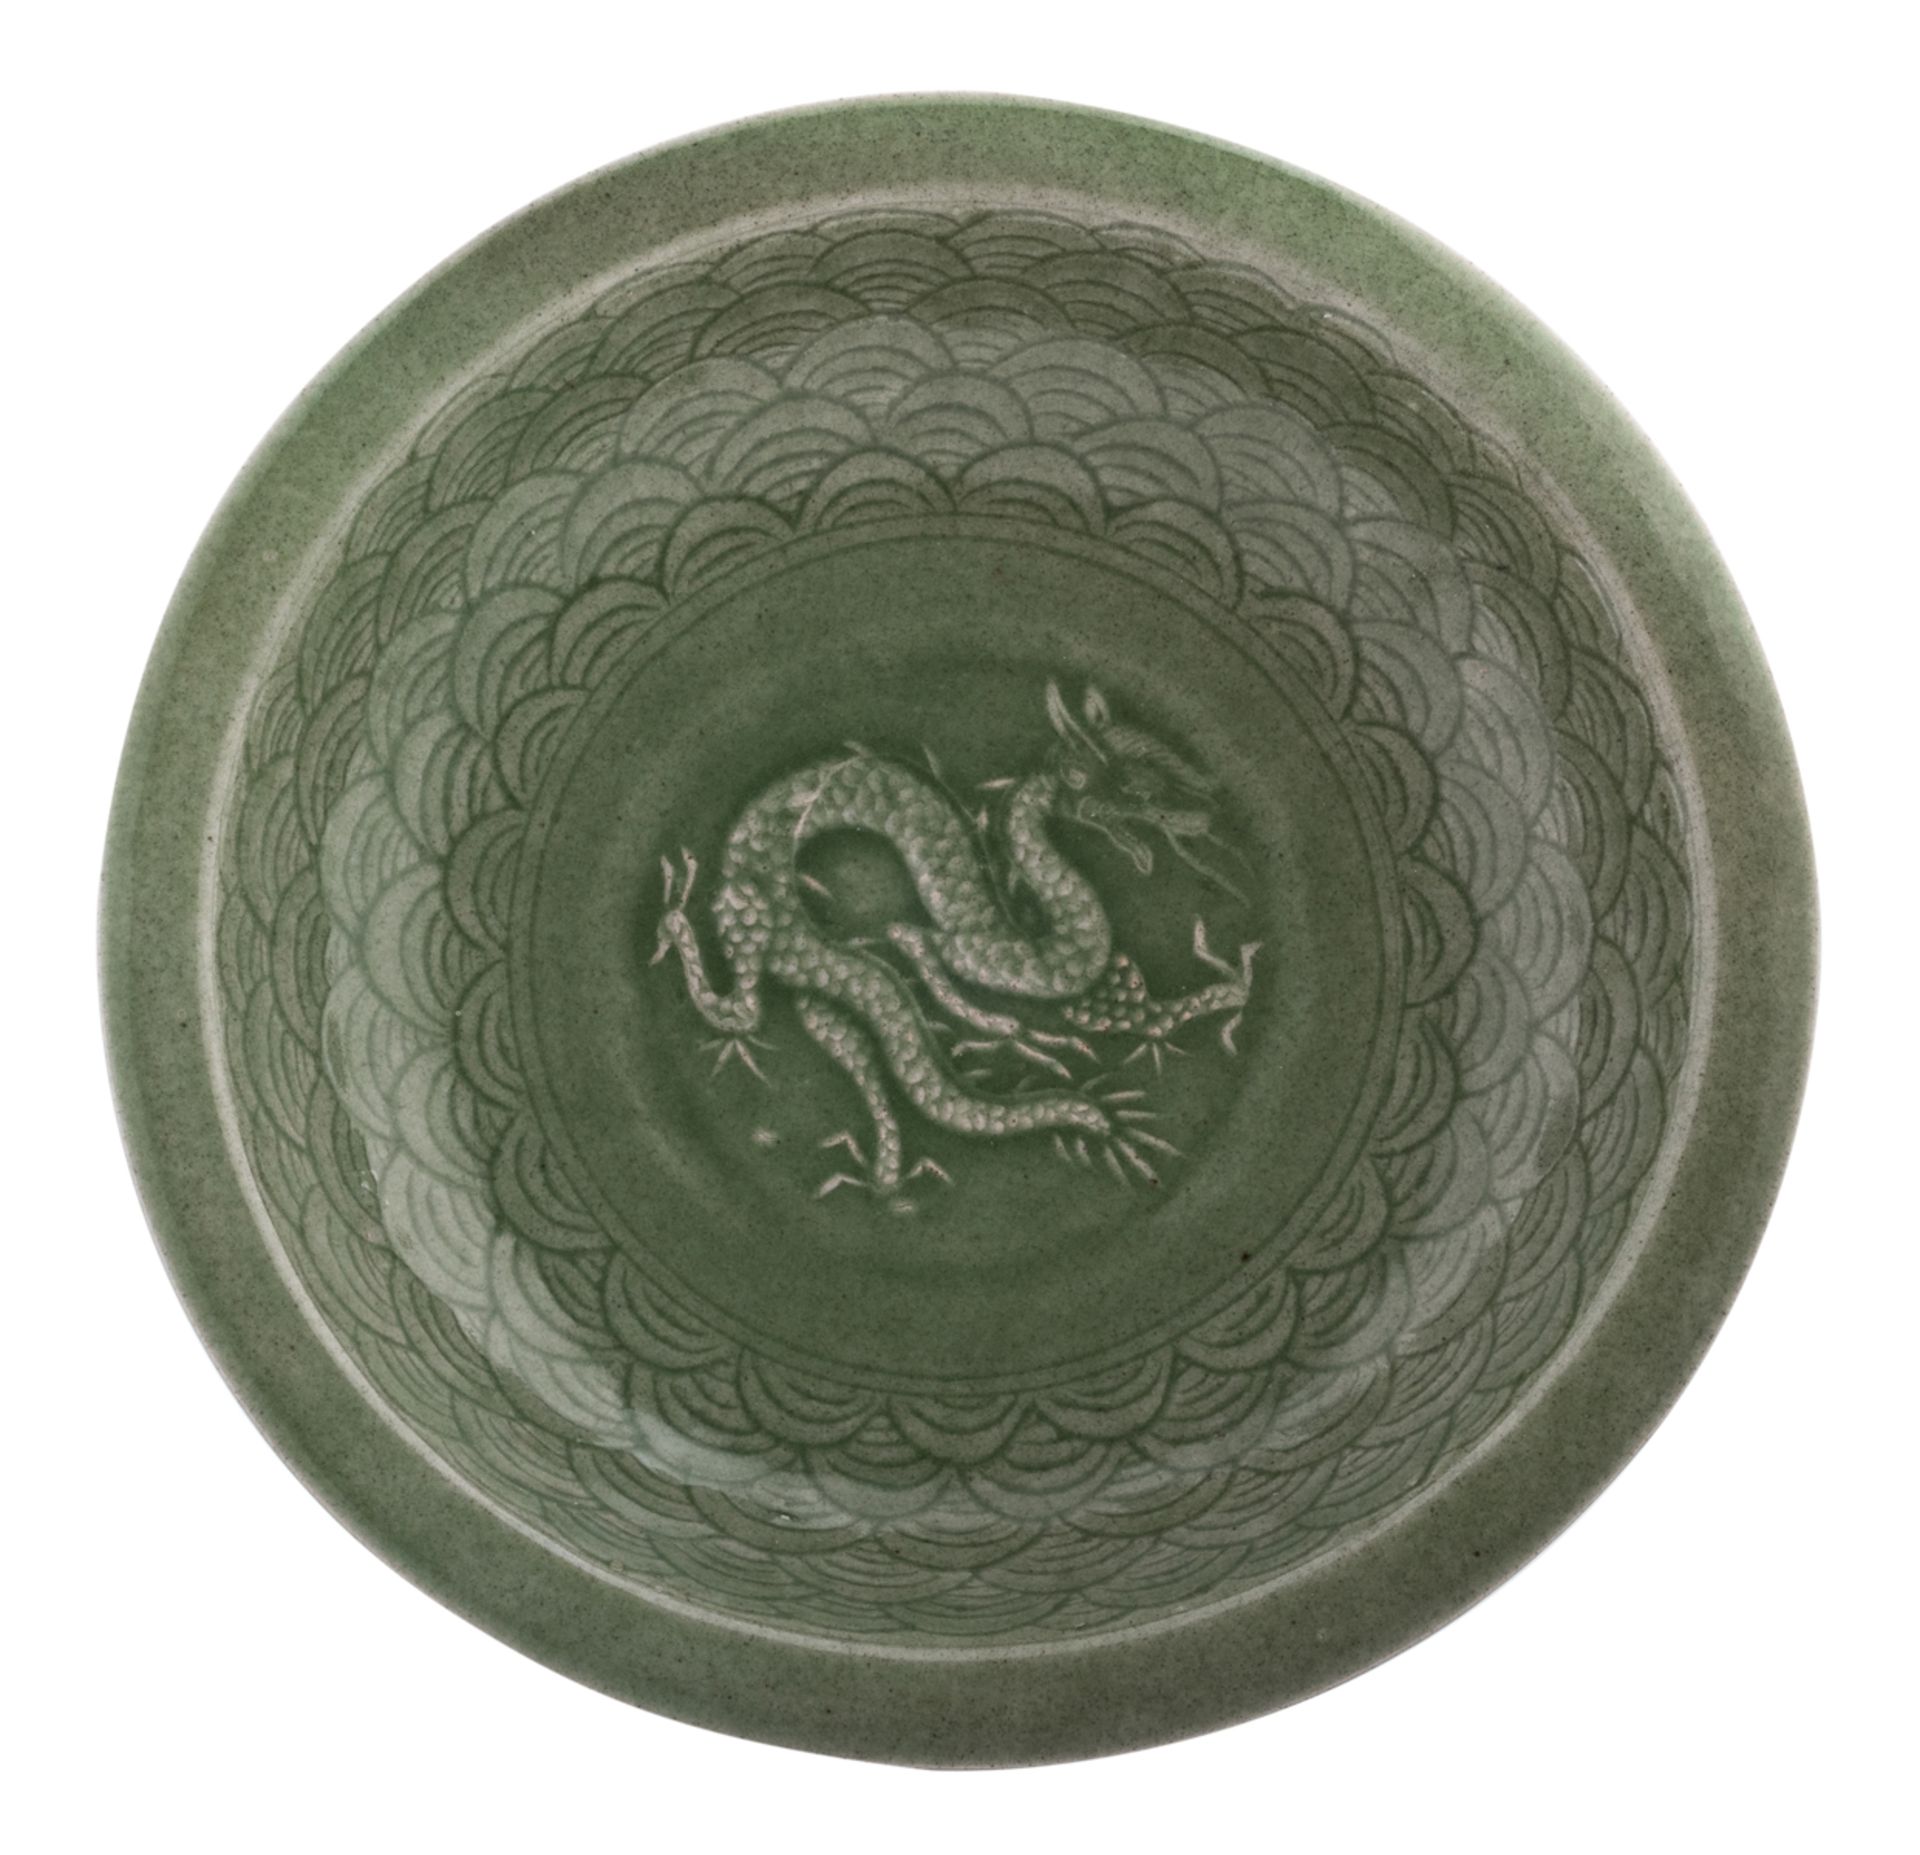 A Chinese celadon stoneware plate, decorated with incised waves and a three clawed dragon in appliqu